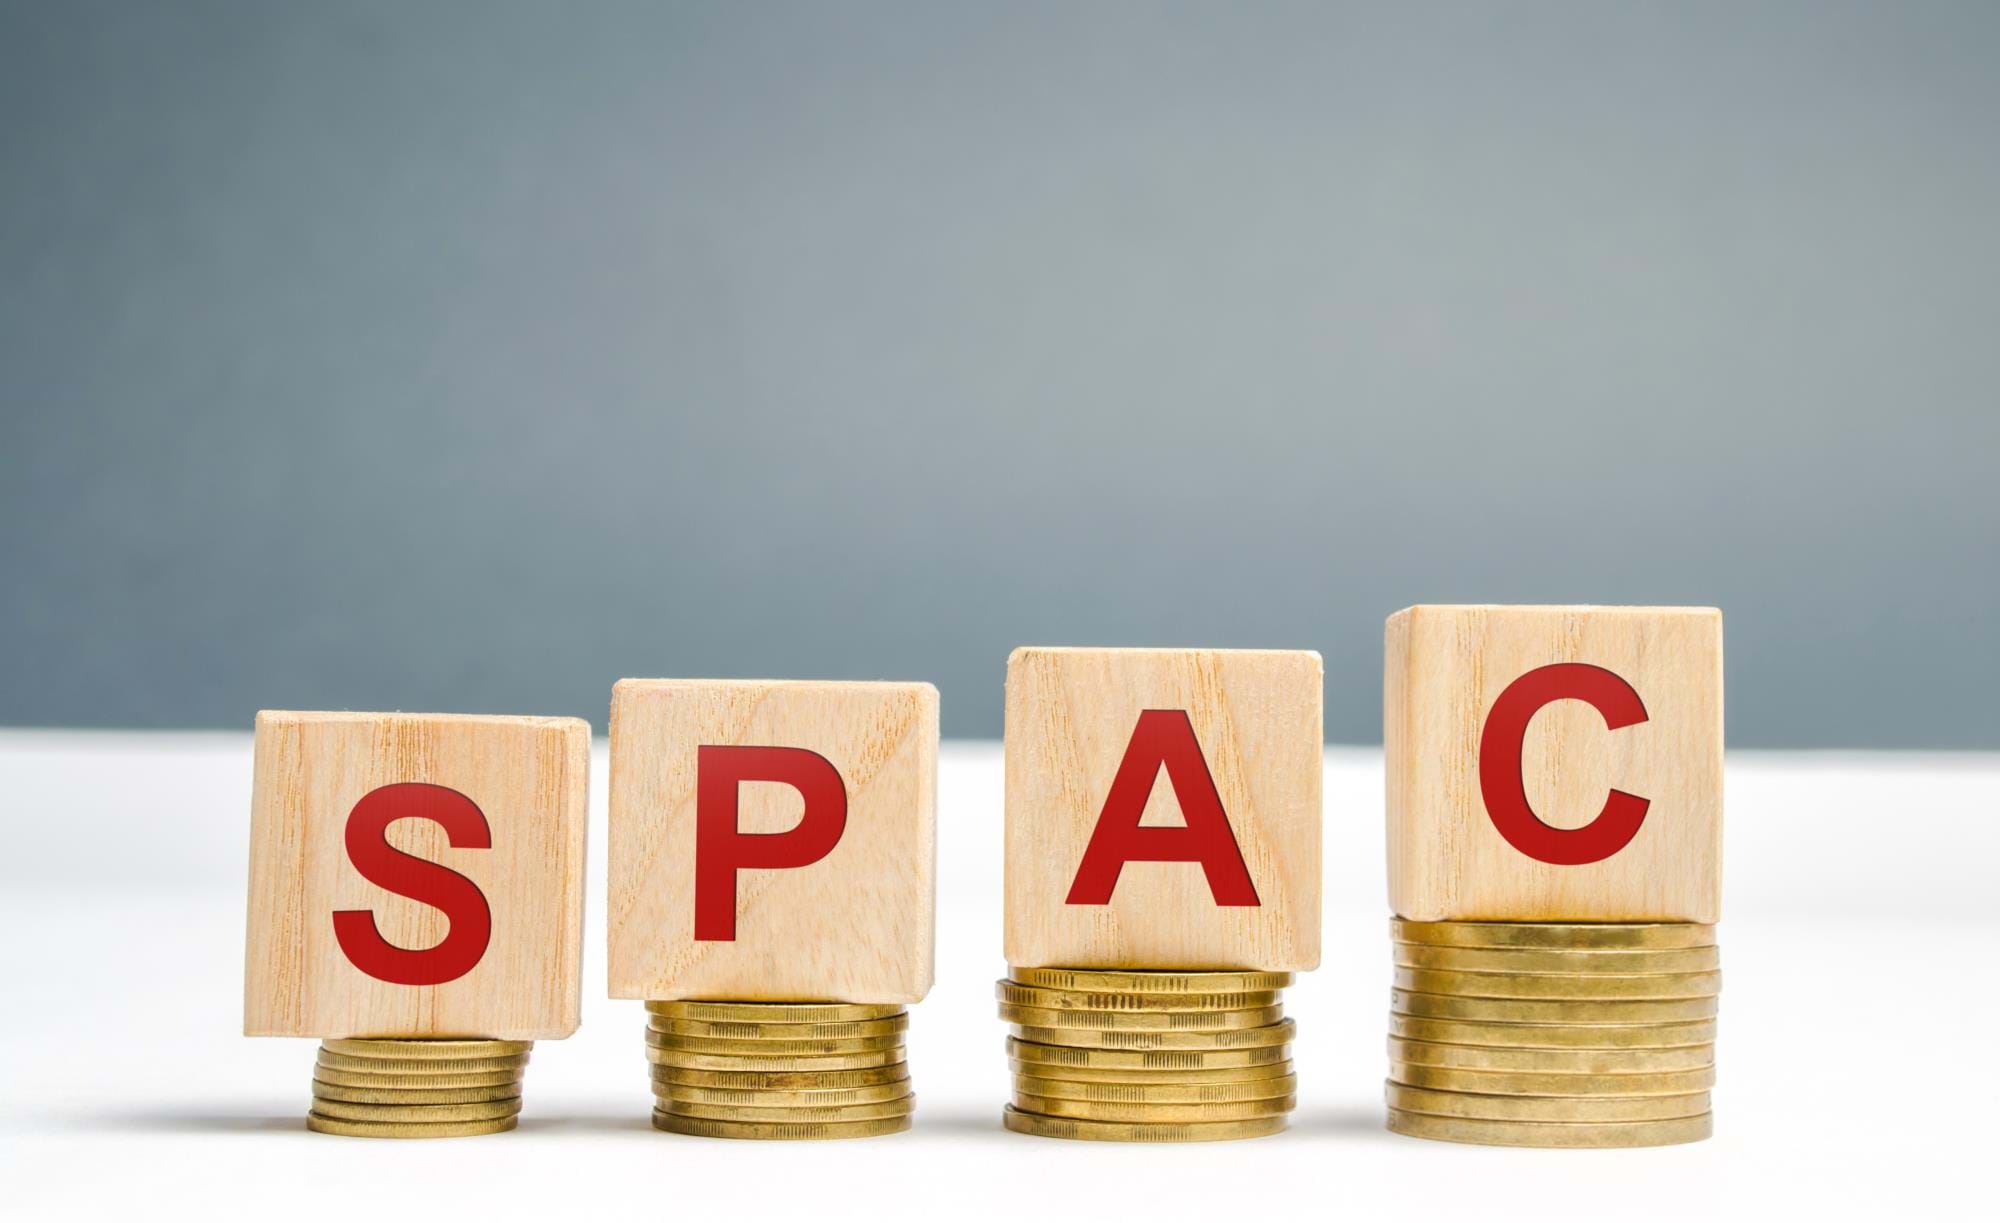 Special Purpose Acquisition Companies (“SPACs”): A Unique Challenge for Directors and Officers Liability Insurance Programs